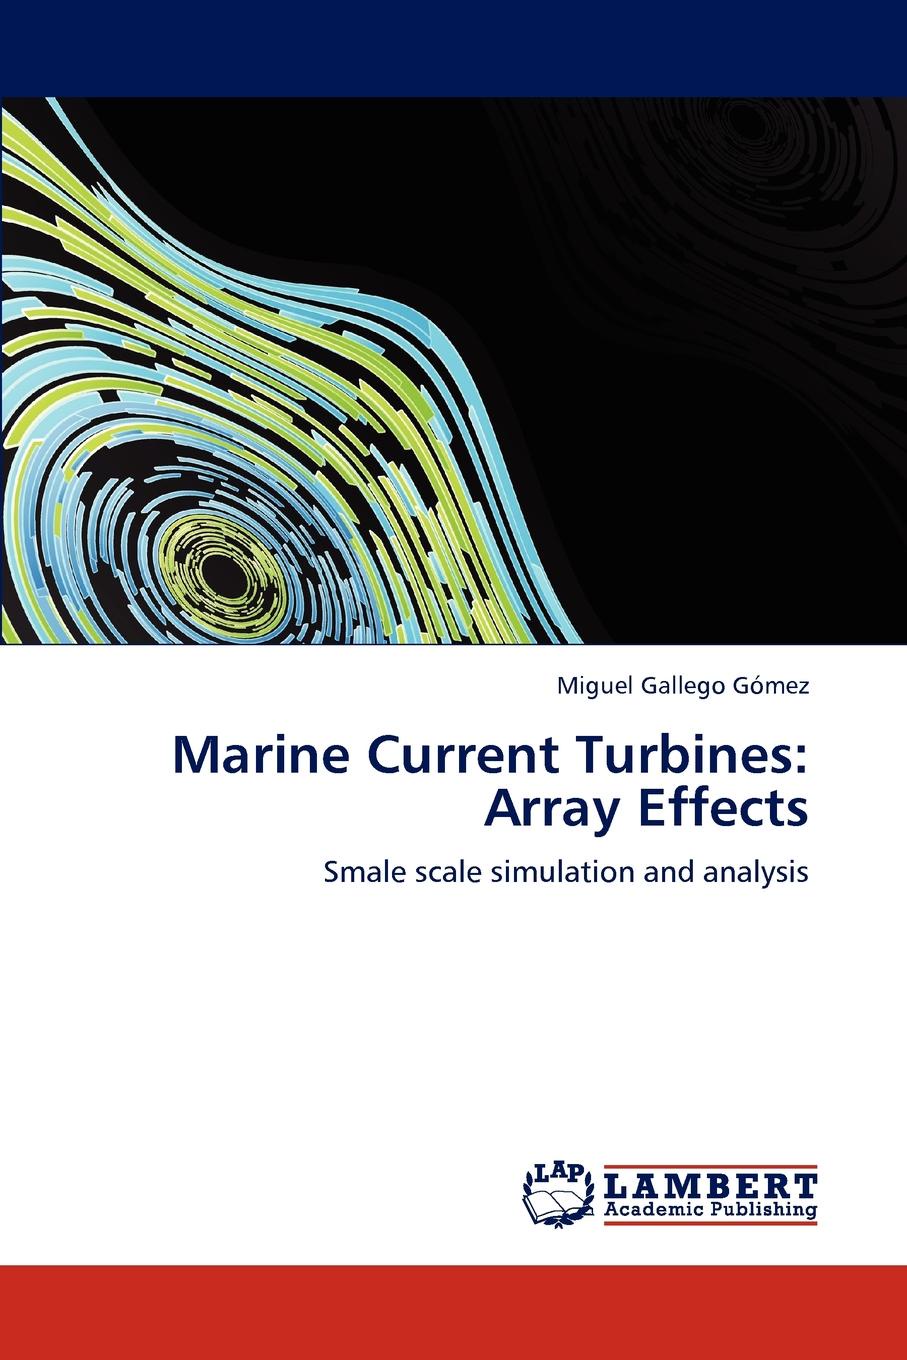 Marine Current Turbines. Array Effects